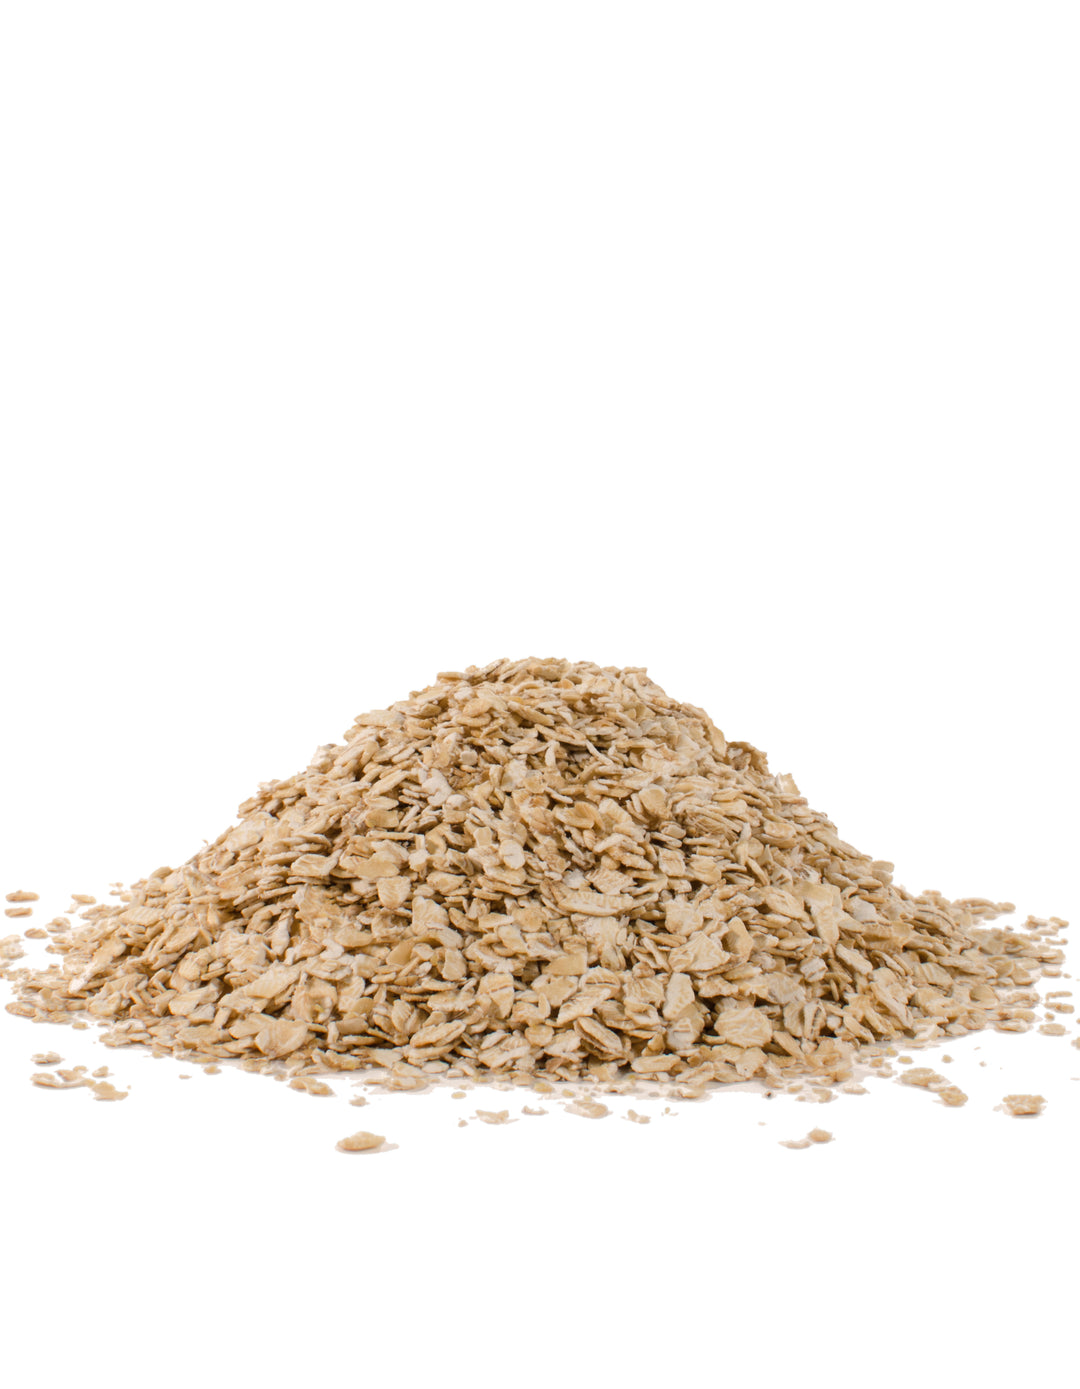 Bob's Red Mill Natural Foods Inc Old Fashioned Rolled Oats-25 lb.